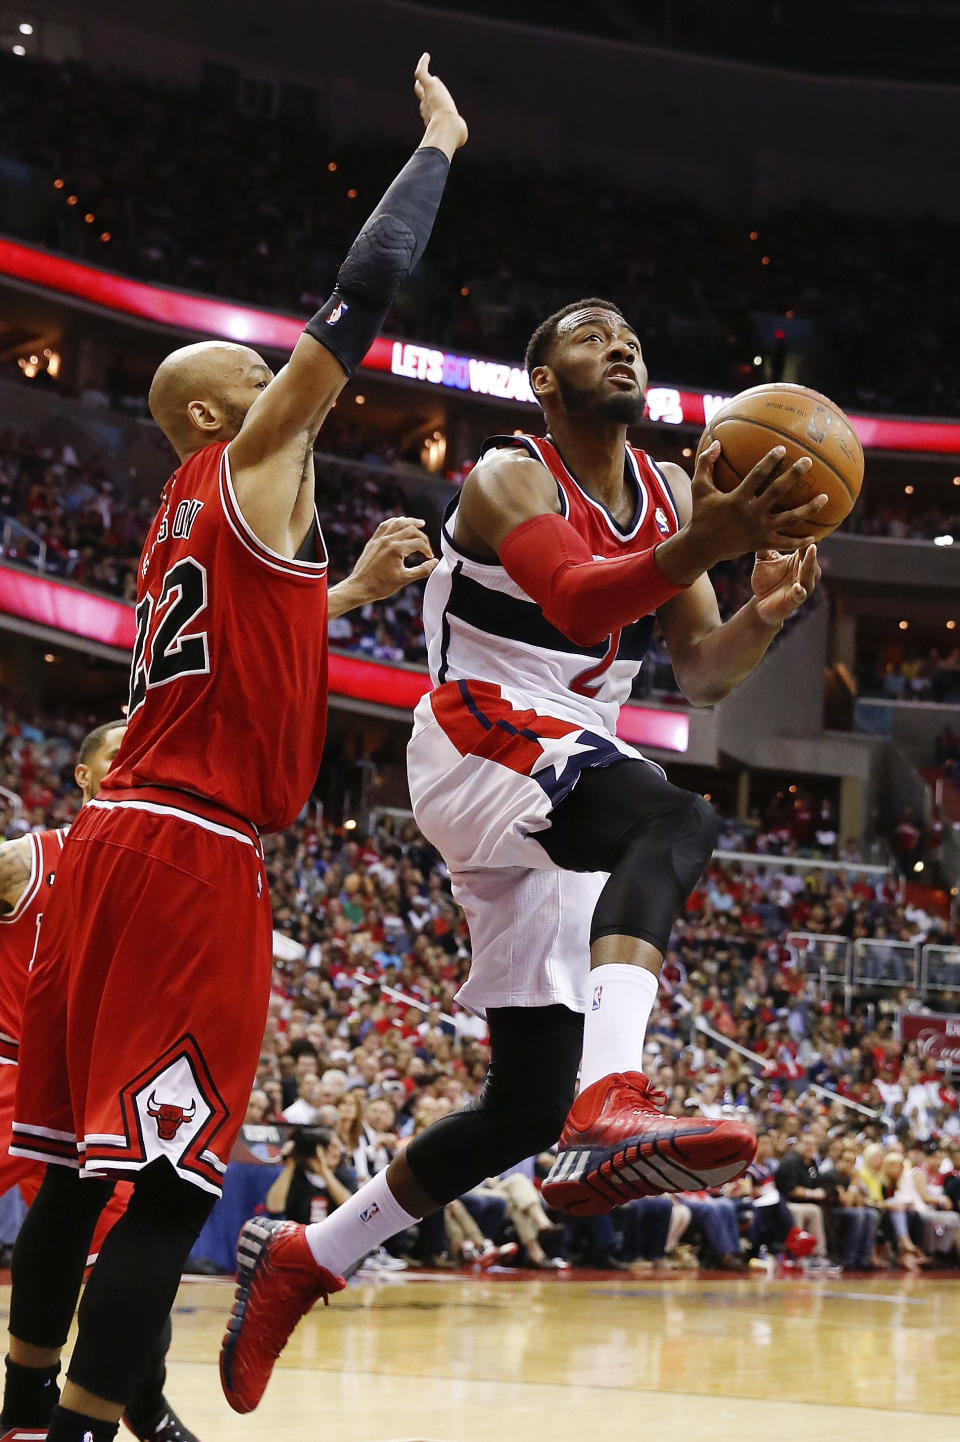 Washington Wizards guard John Wall (2) shoots under pressure from Chicago Bulls forward Taj Gibson (22) during the second half in Game 4 of an opening-round NBA basketball playoff series in Washington, Sunday, April 27, 2014. (AP Photo/Alex Brandon)